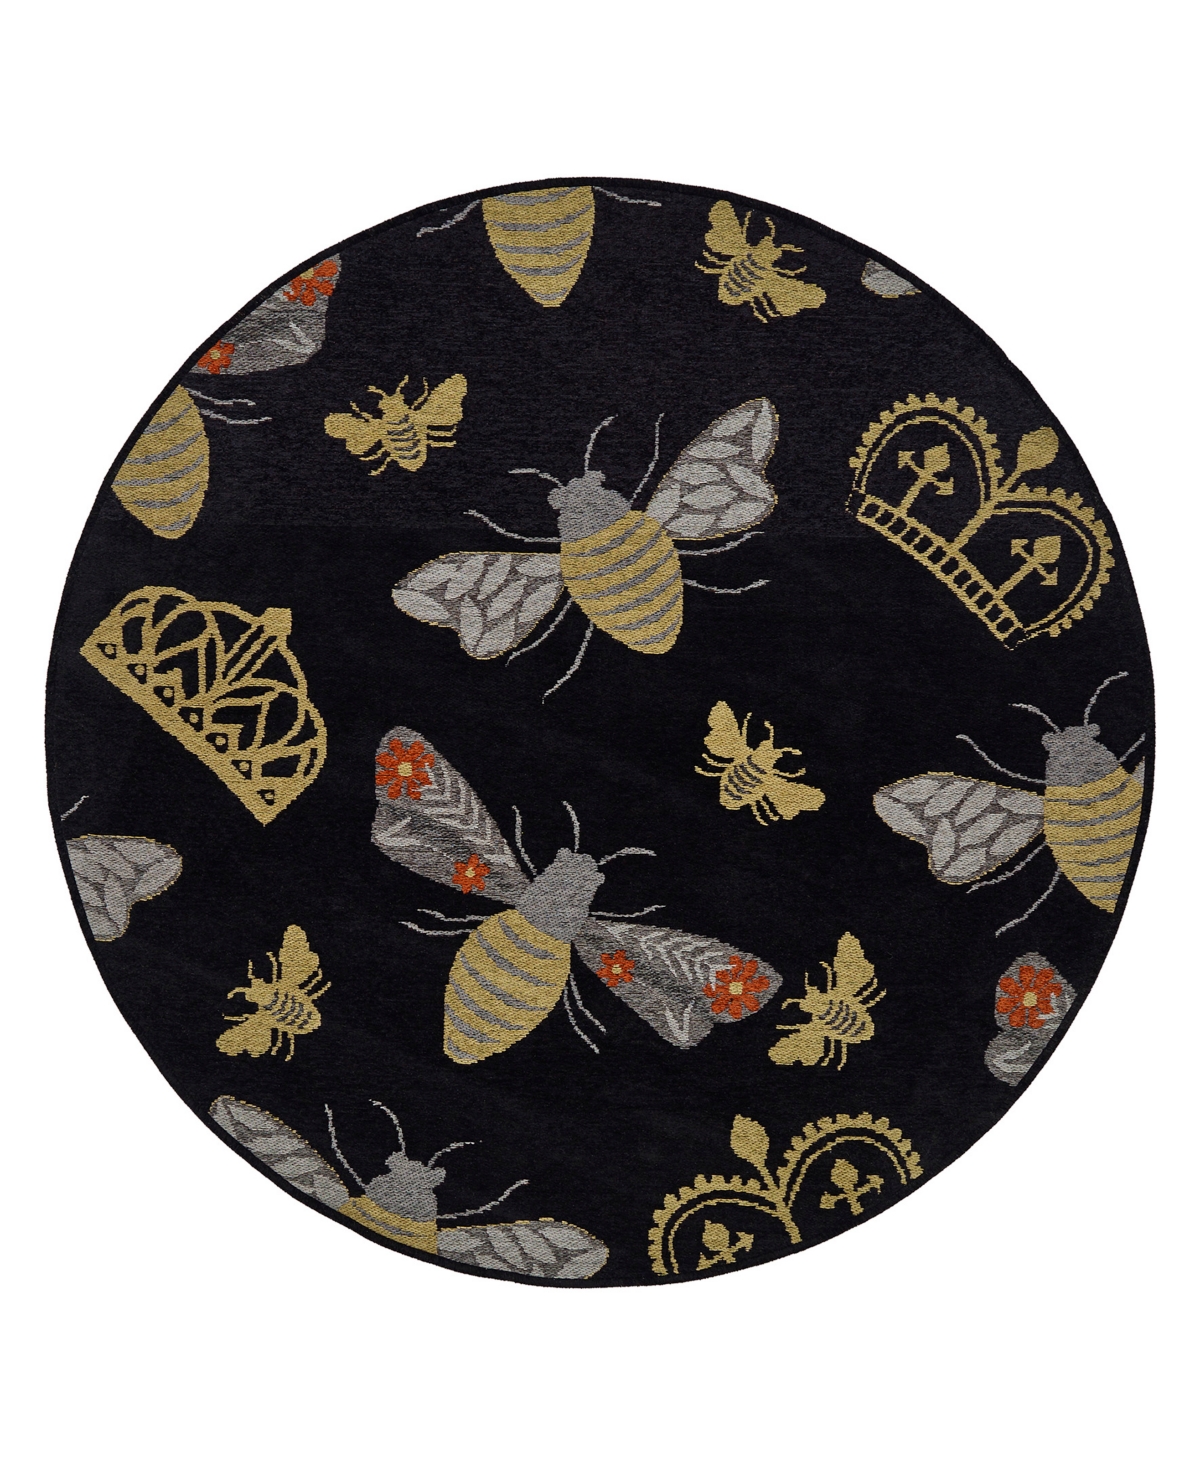 Hilary Farr Critter Comforts Hcc02-79 5' X 5' Round Area Rug In Black